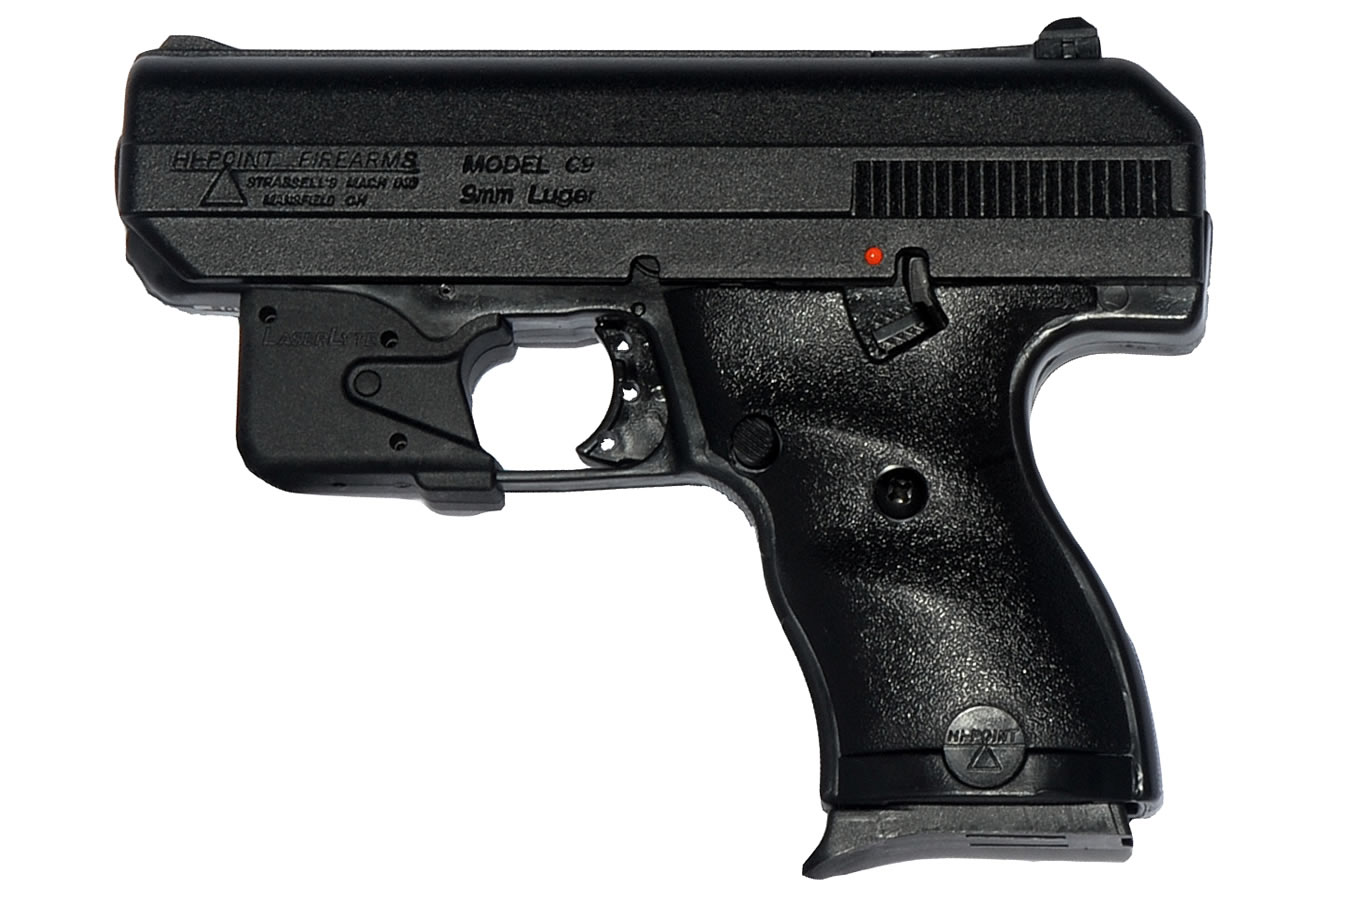 C9 9MM WITH TRIGGER GUARD MOUNT LASER